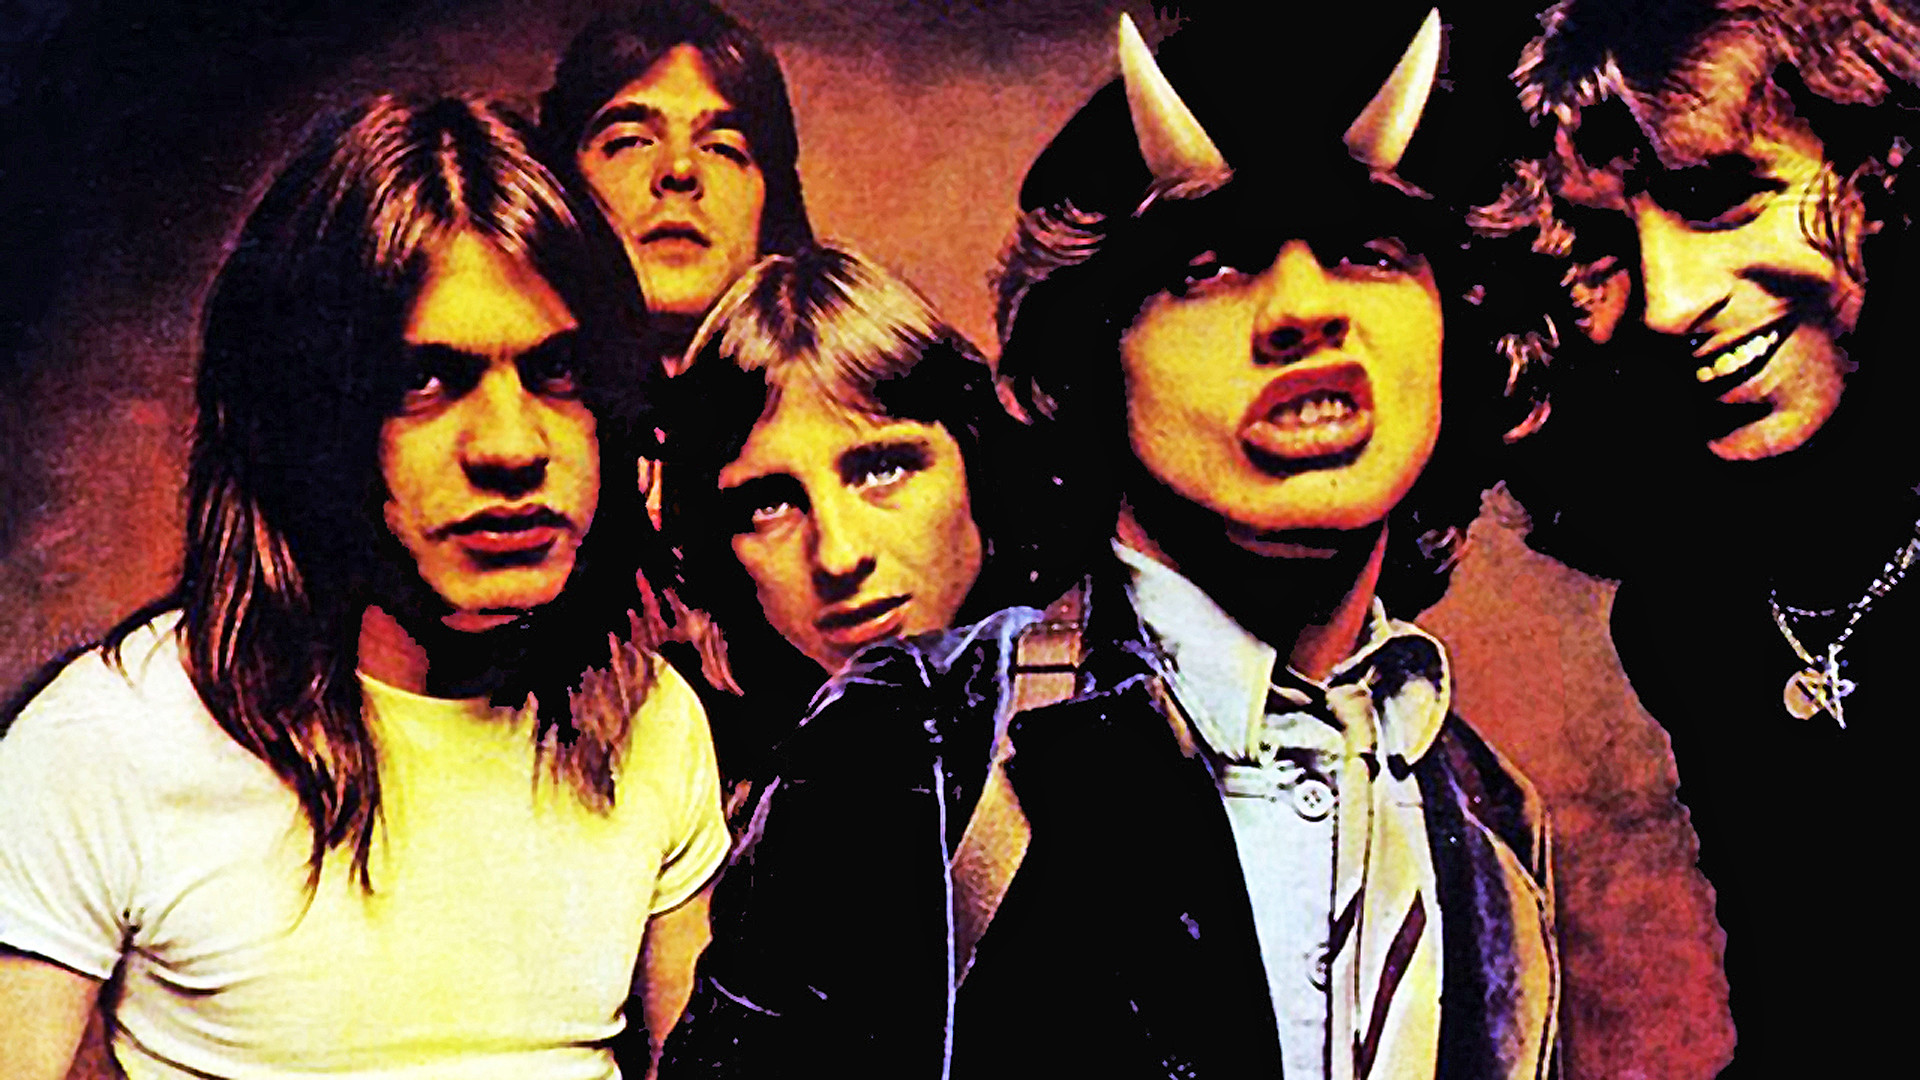 1920x1080 Angus Young. Angus Young 0 HTML code. Angus Young HD background | AC/DC  wallpapers